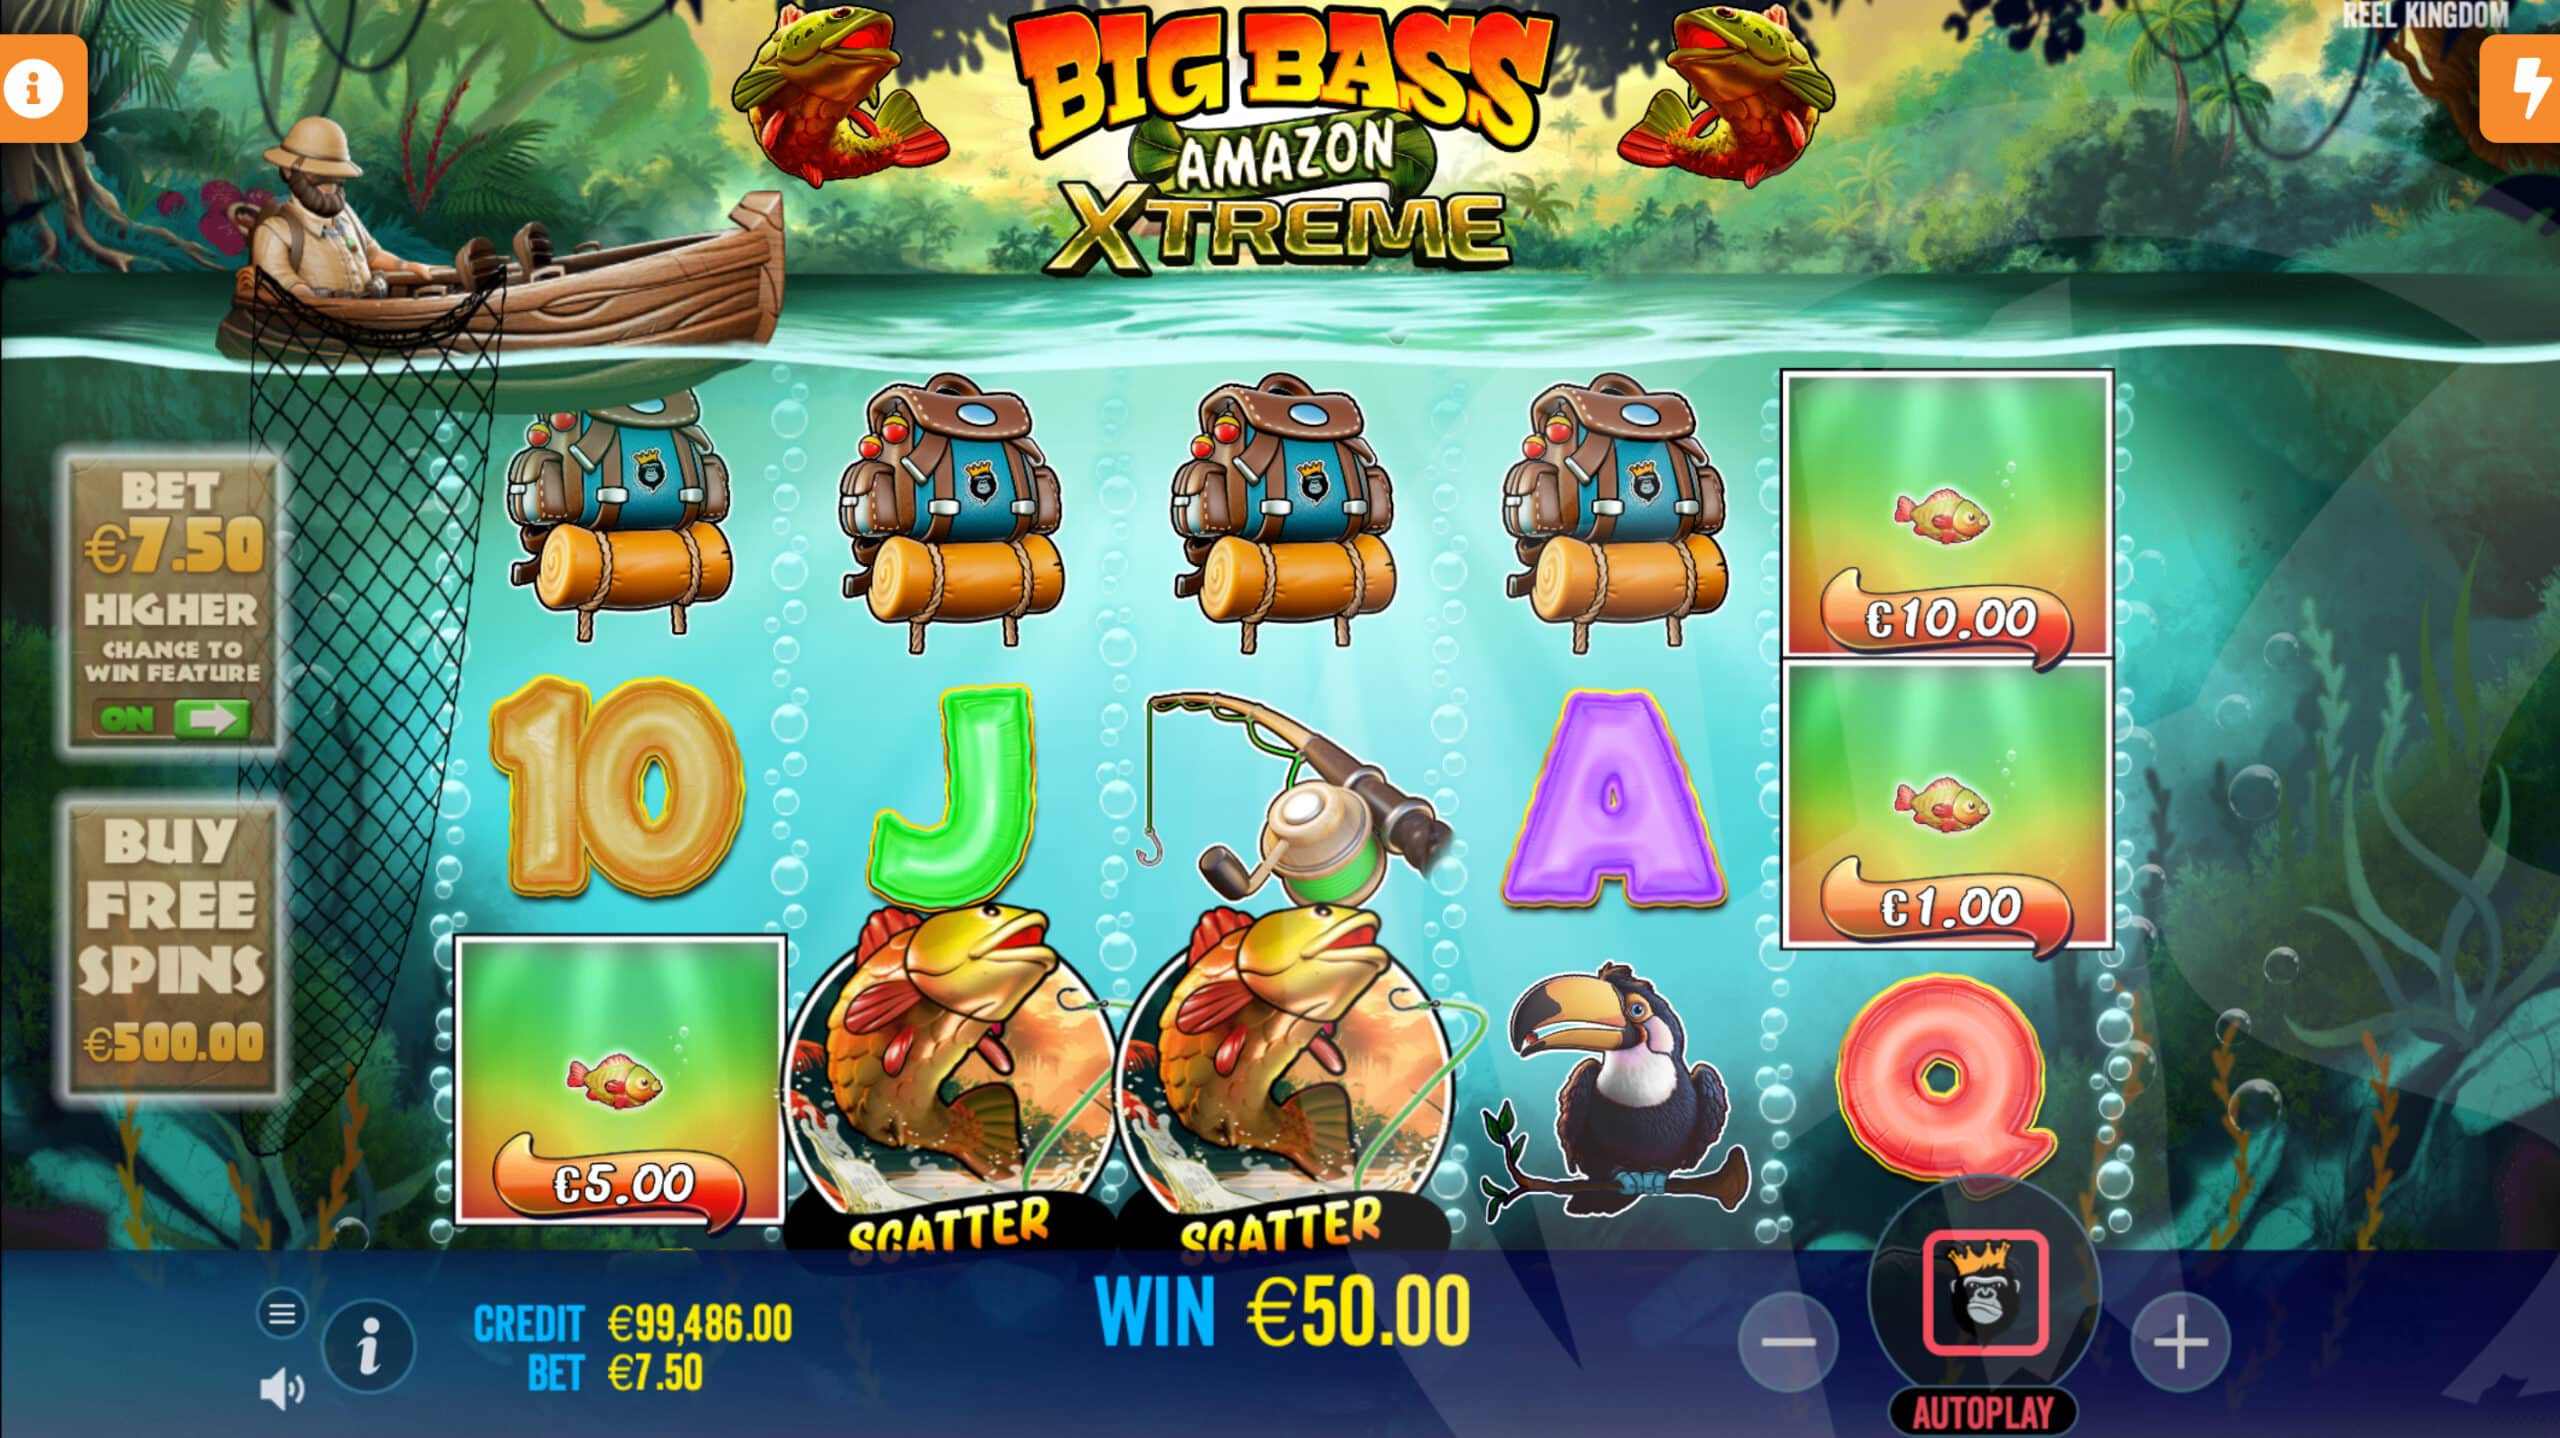 Big Bass Amazon Xtreme Offers Players 10 Fixed Win Lines